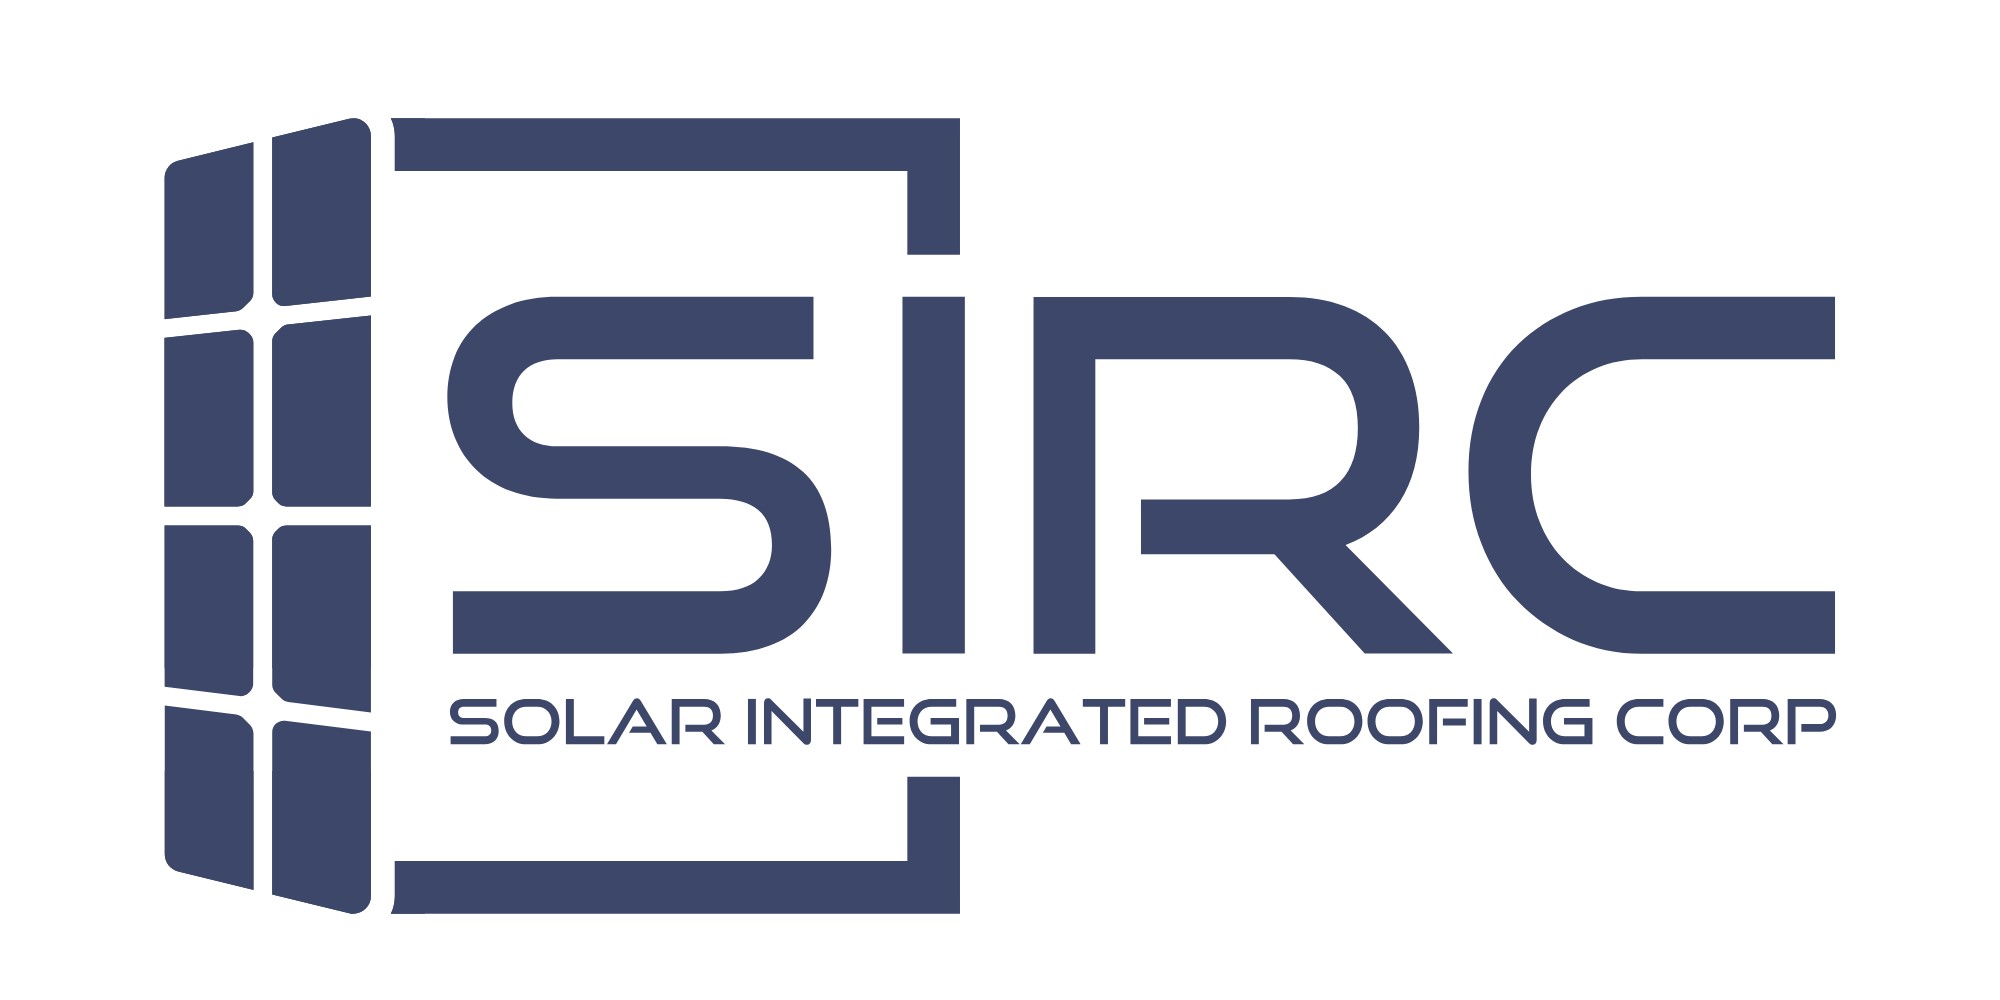 Solar Integrated Roofing Corp. (SIRC) - Solutions for Green Energy